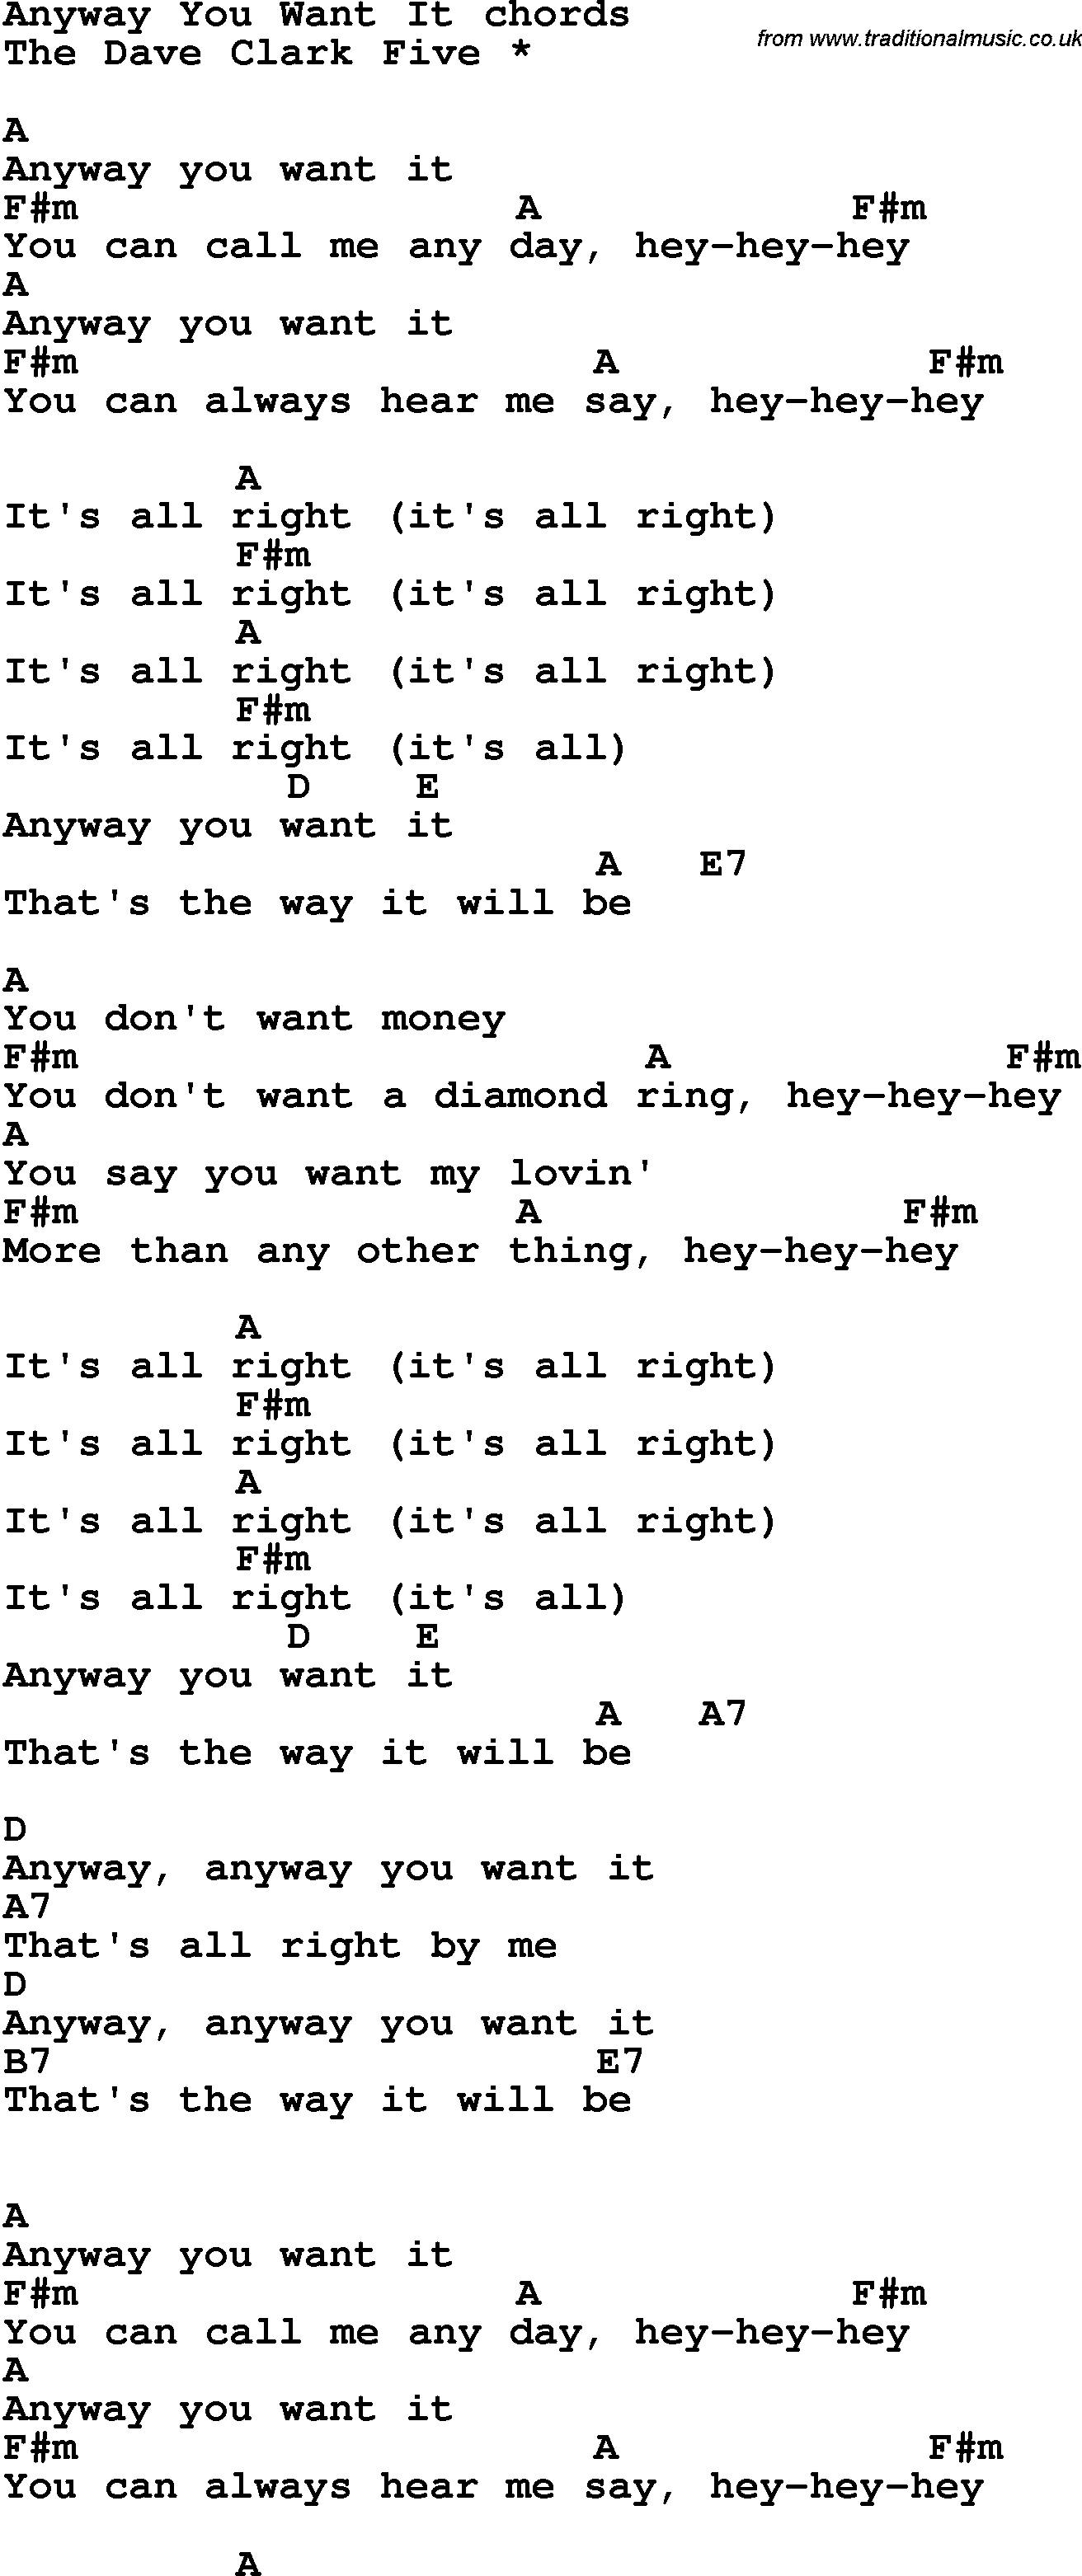 Song Lyrics with guitar chords for Anyway You Want It